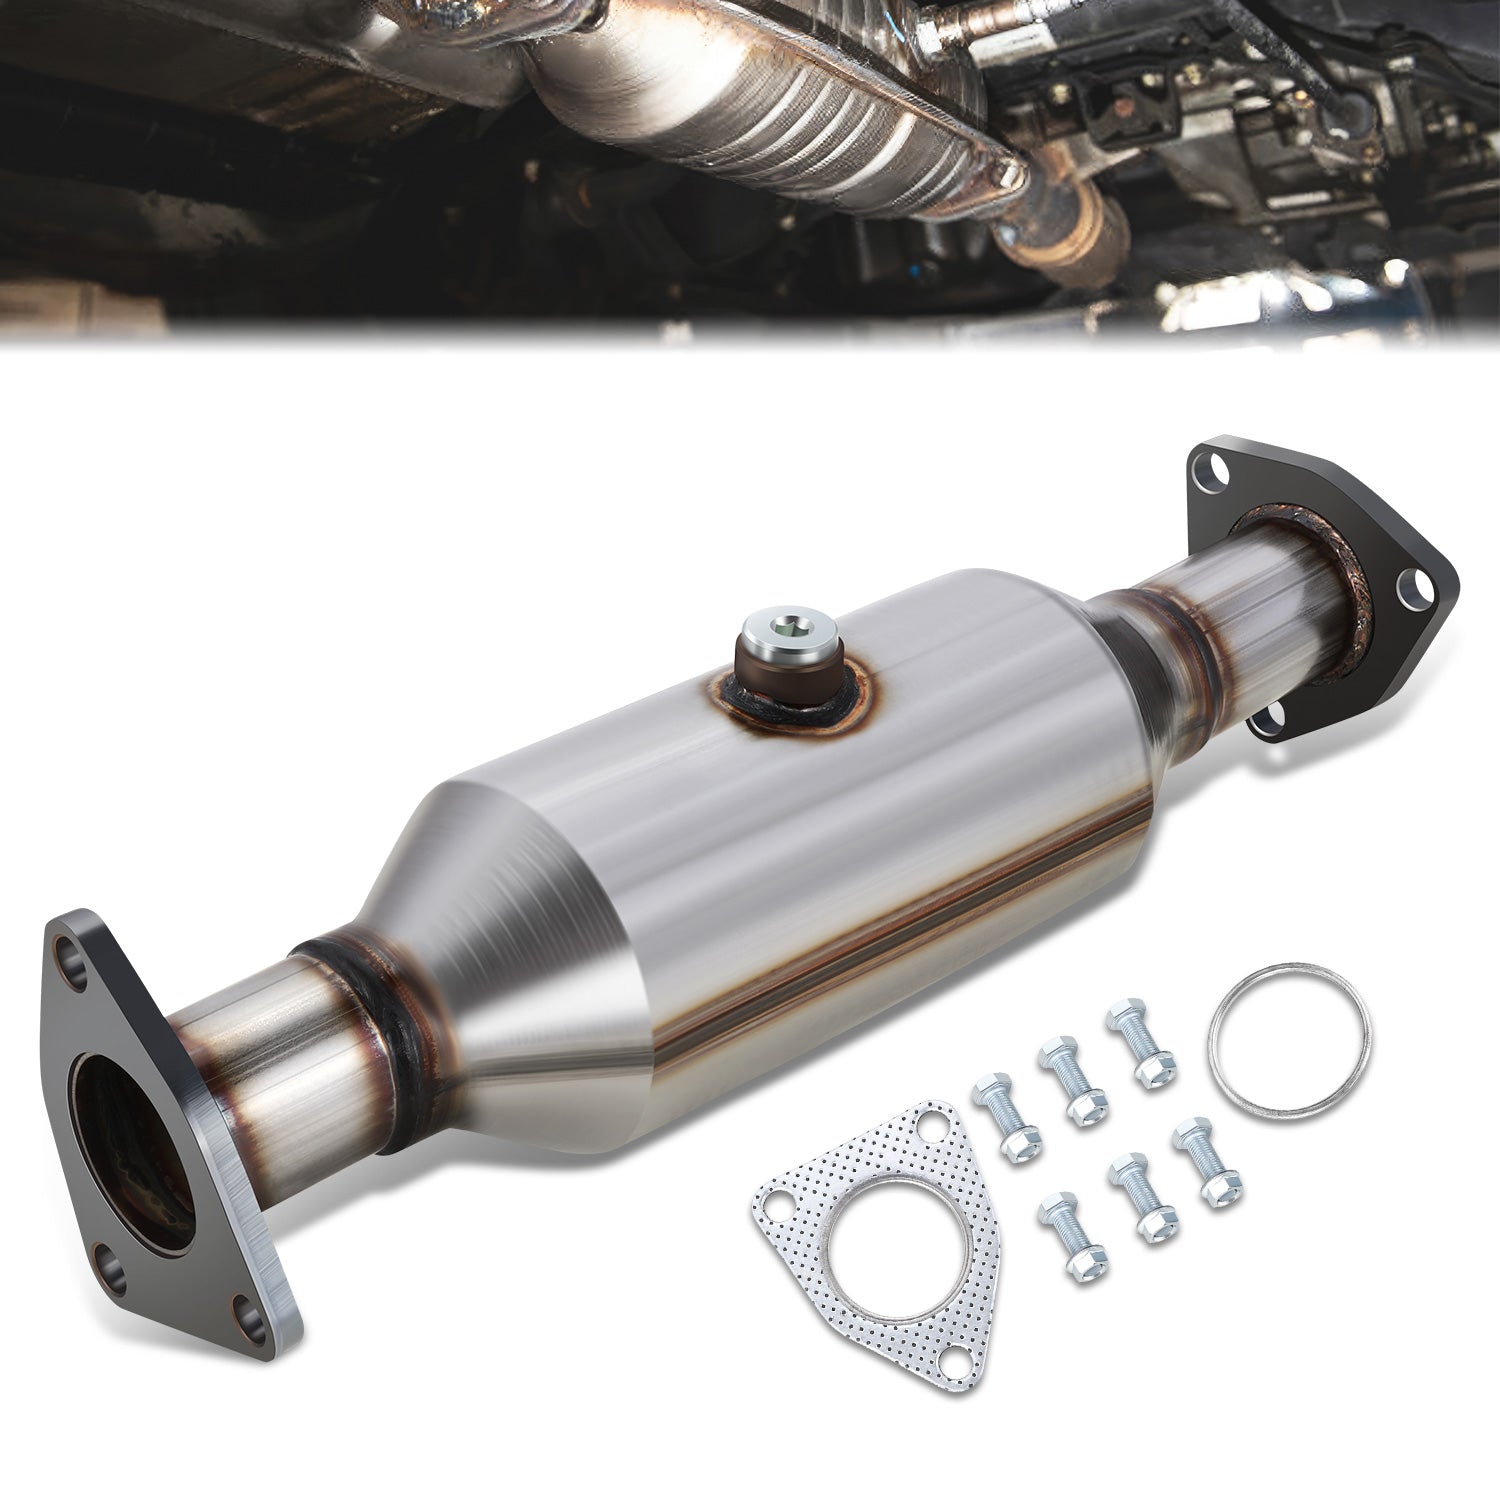 Factory Replacement Catalytic Converter <BR>01-03 Acura CL, 98-02 Accord, 99-04 Odyssey